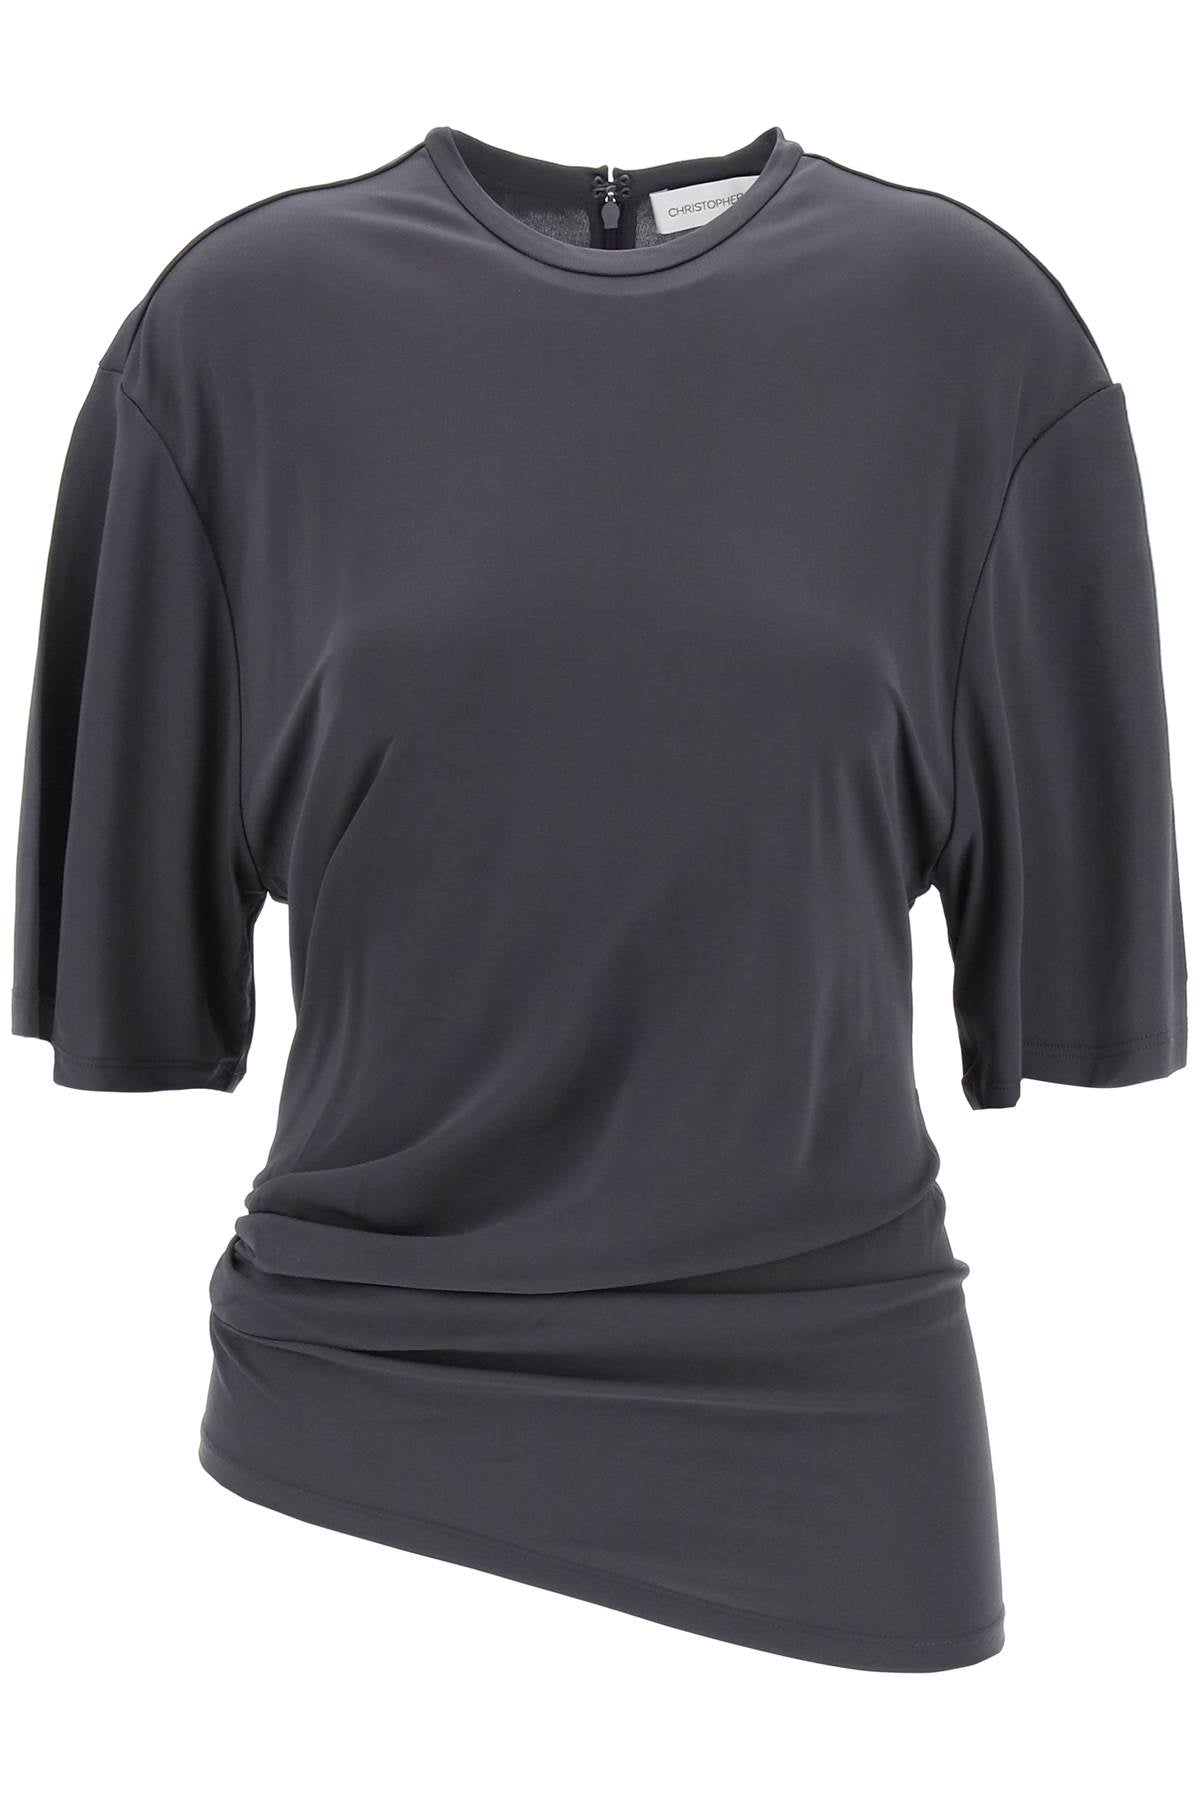 Christopher esber top with side draping detail-0